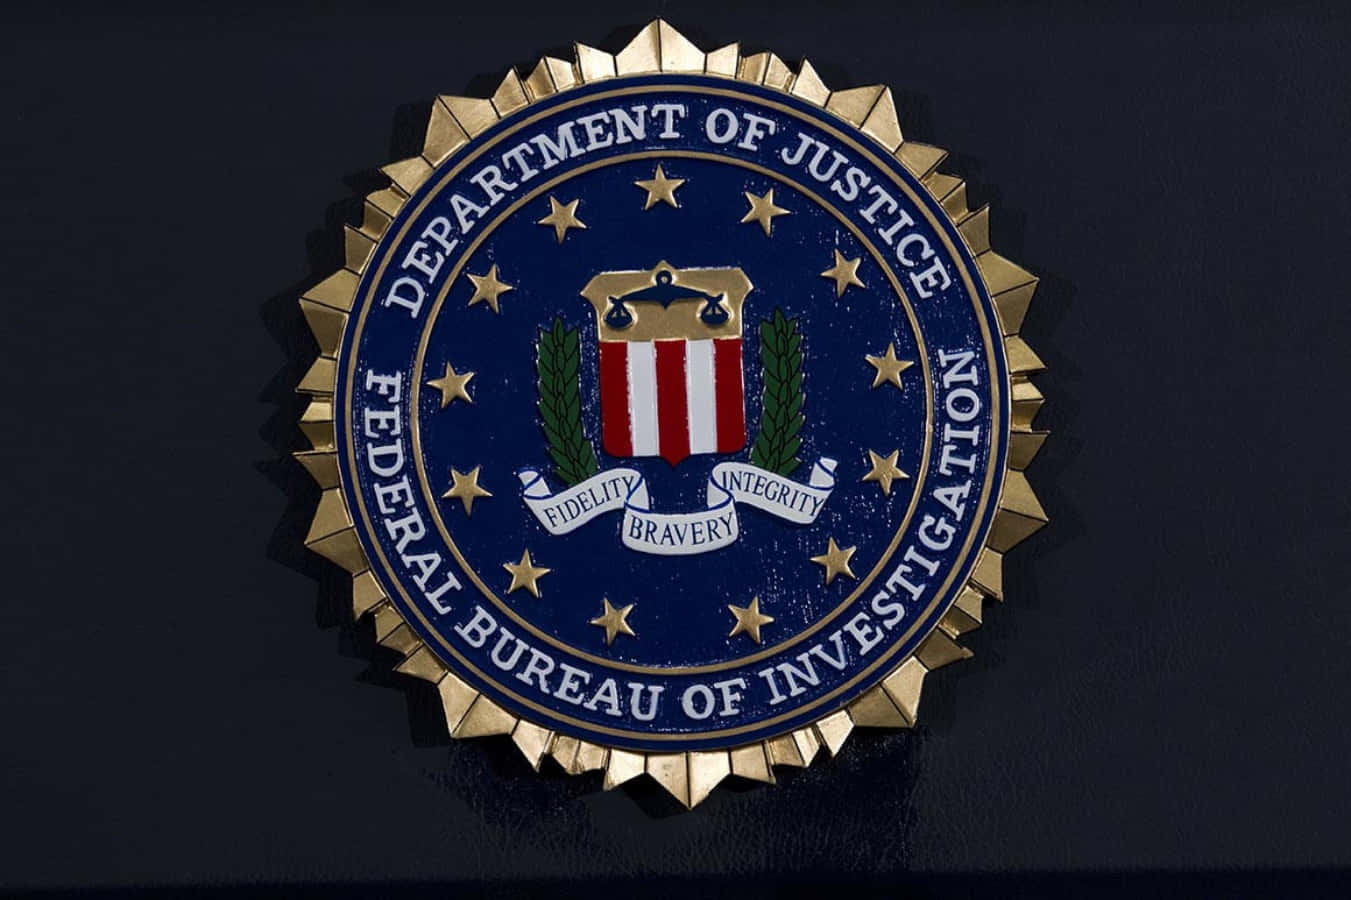 The Fbi Logo Is Shown On A Black Background